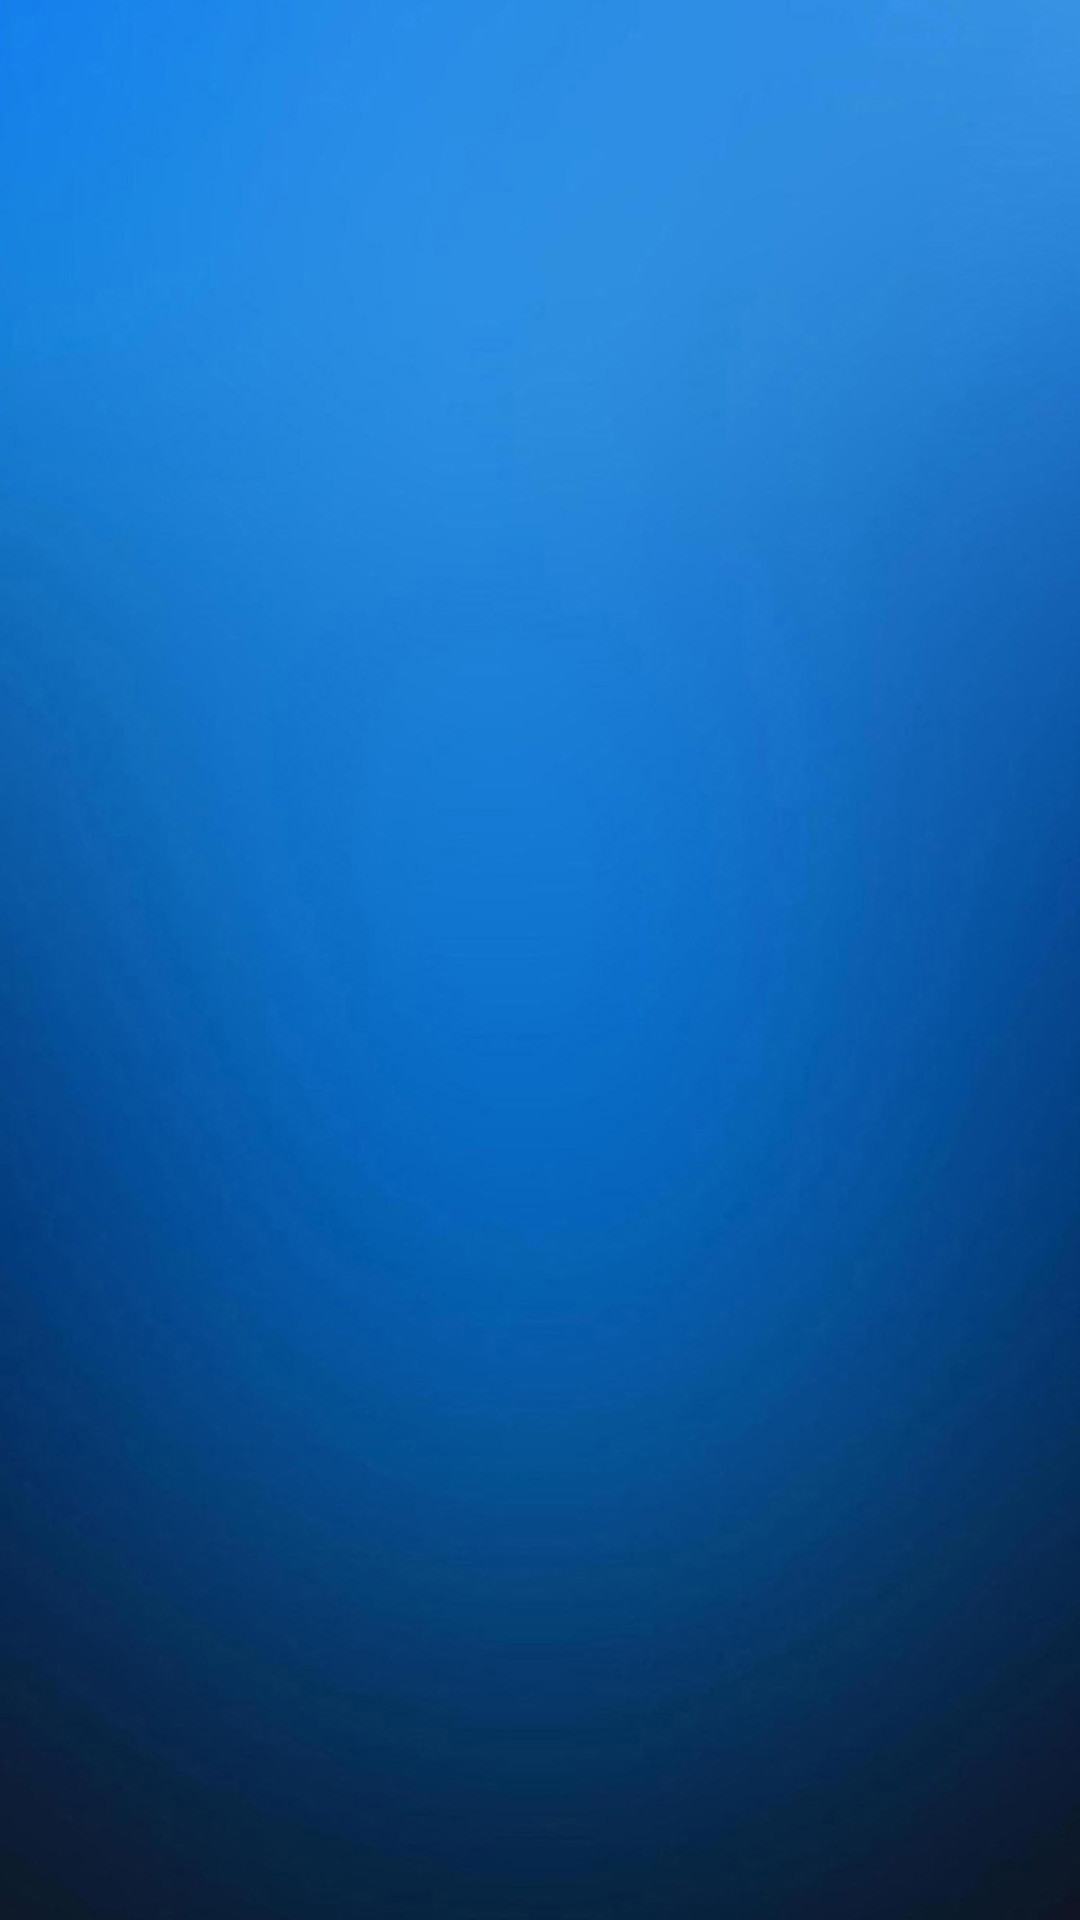 1080x1920 Download simple-dark-blue-background-iphone-7-wallpaper Wallpaper from the   resolutions. This wallpaper comes from Simple directory and we  focuse ...